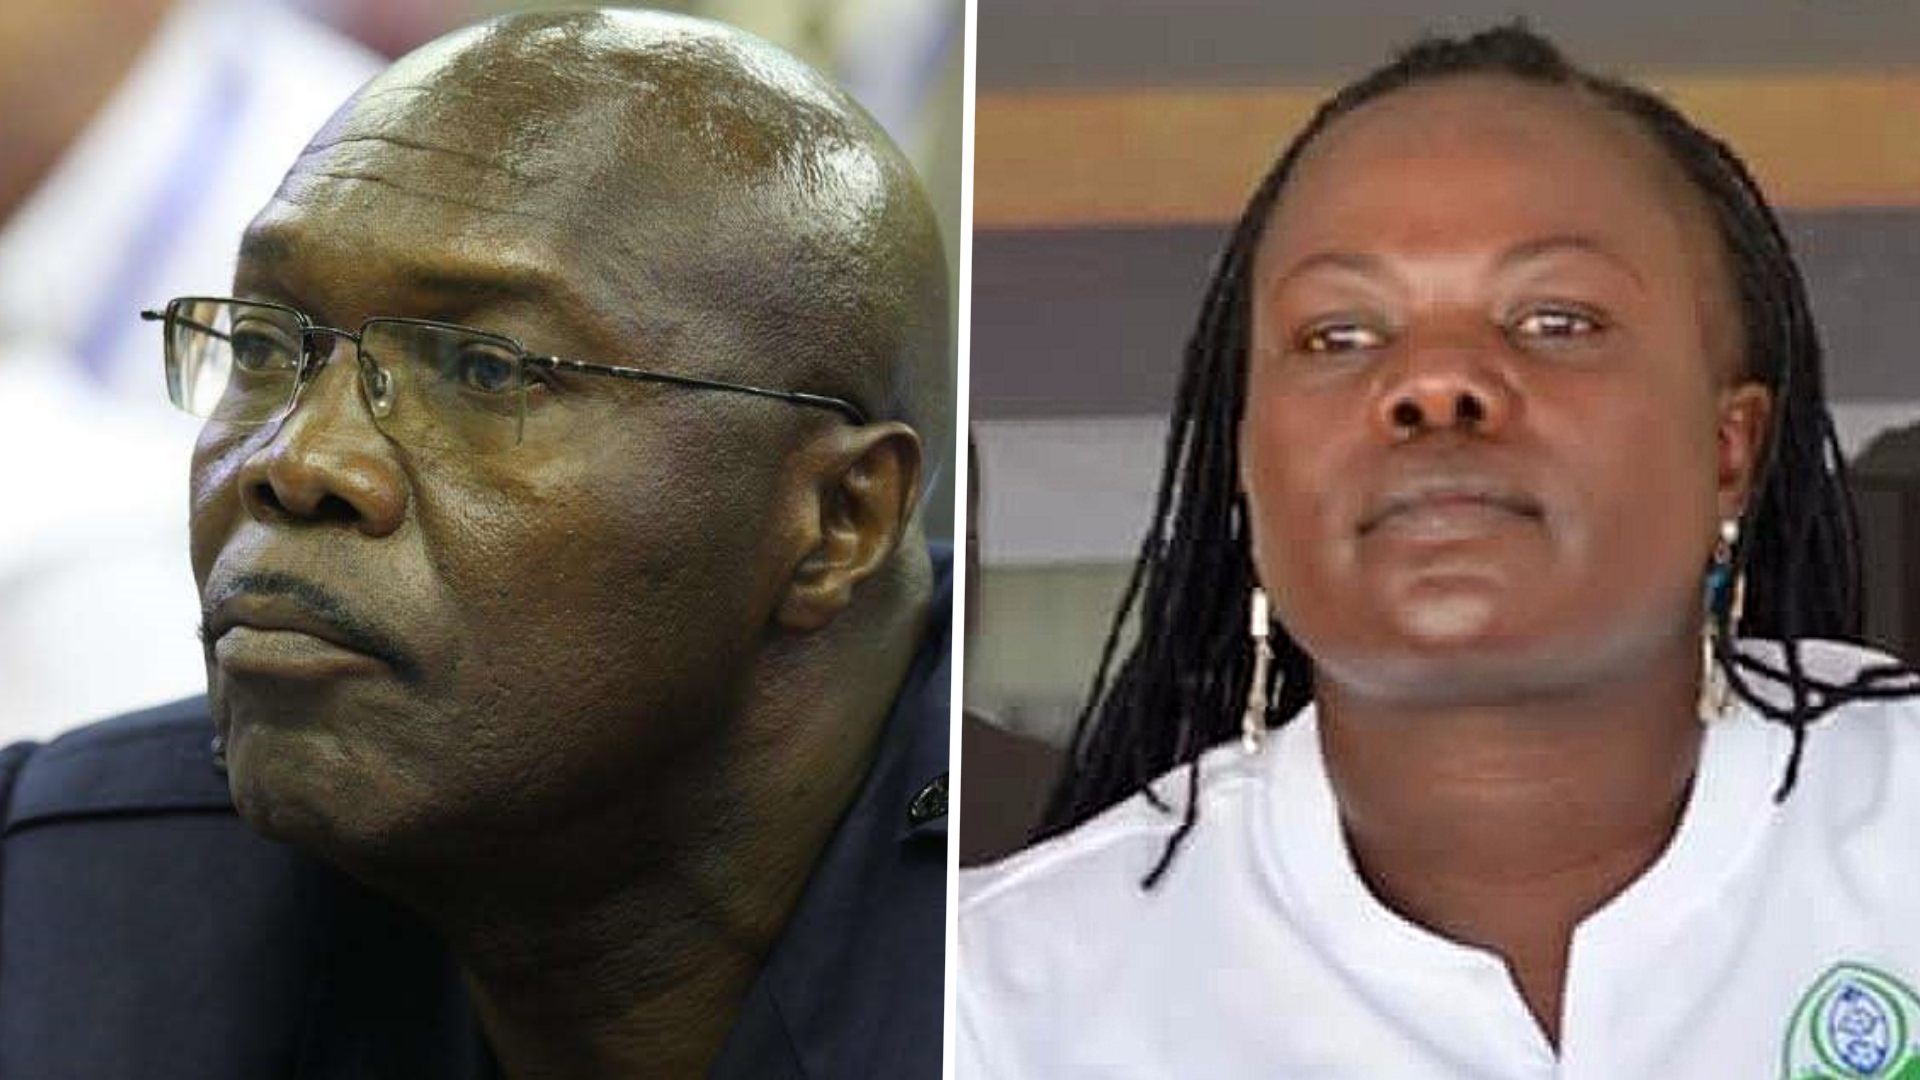 ‘Rachier, don’t listen to noisemakers’ – Nyangi launches scathing attack aimed at Gor Mahia boss